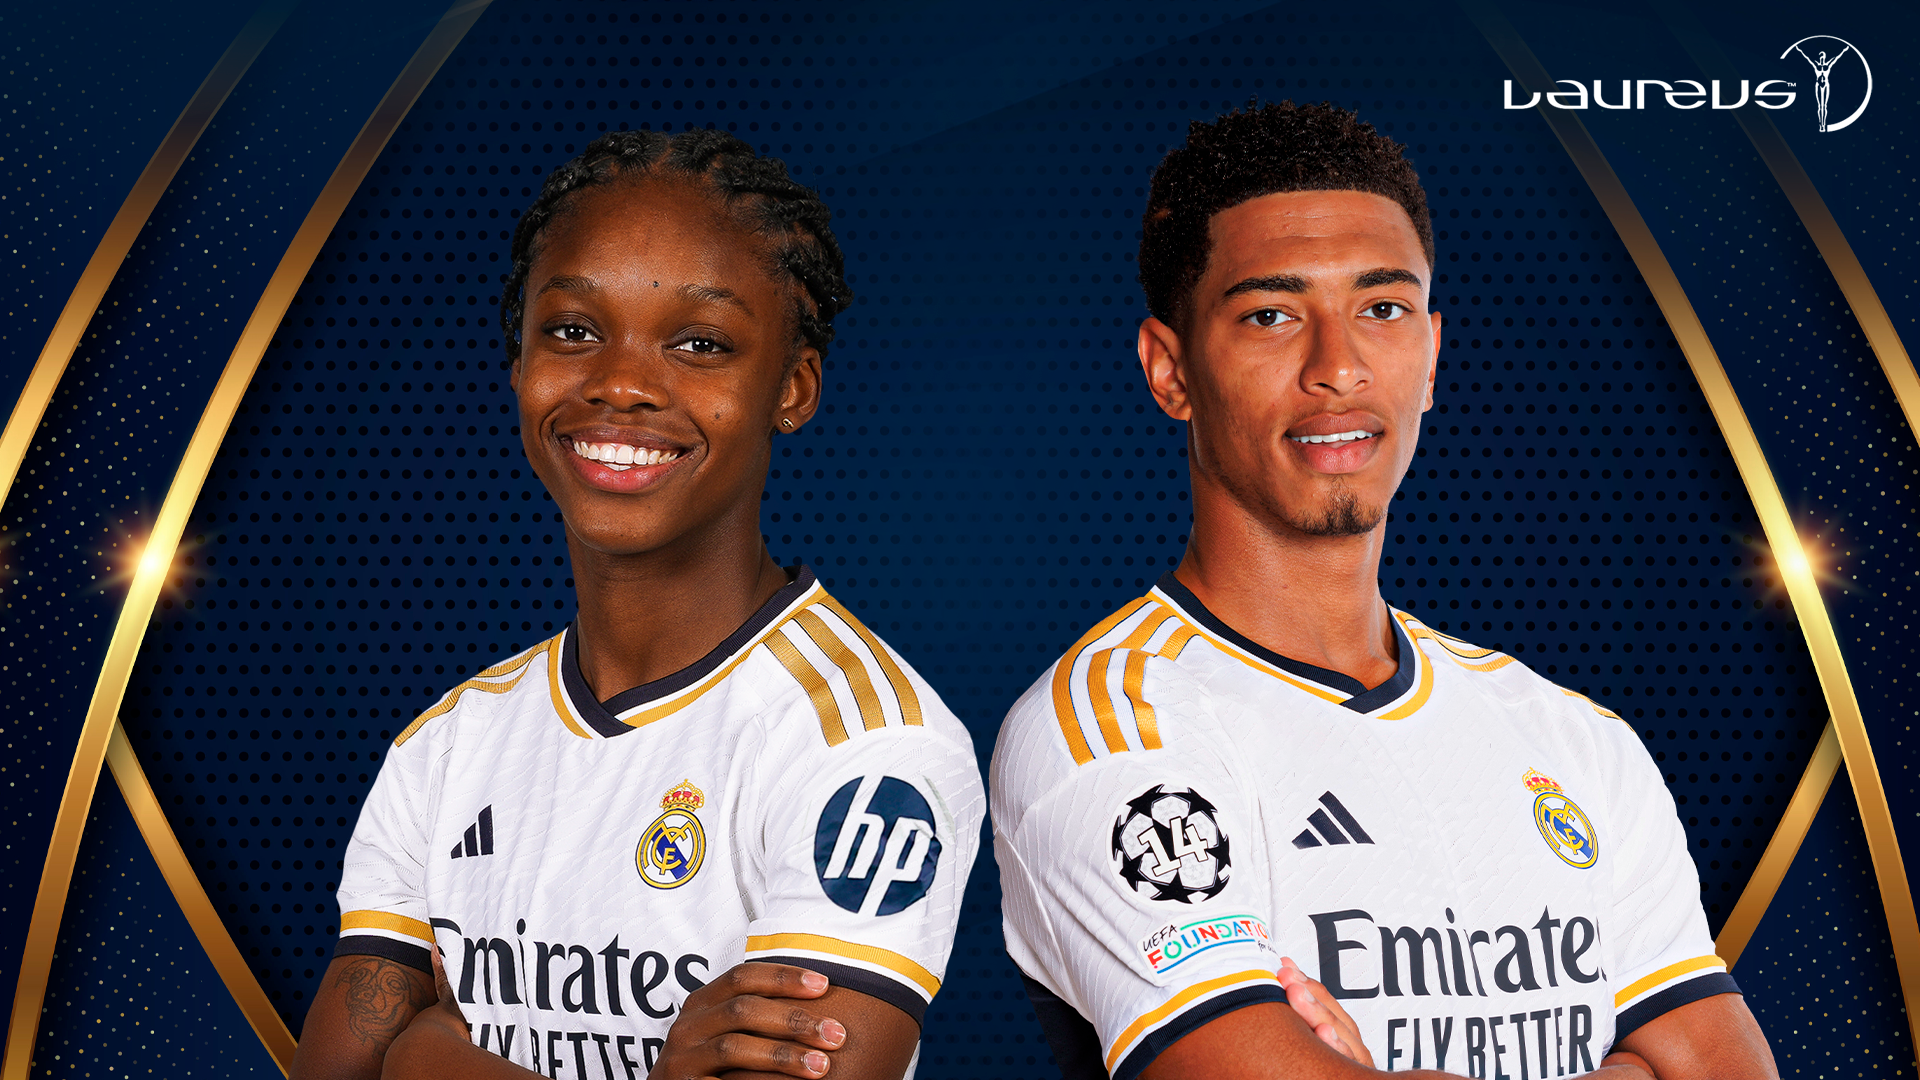 Bellingham and Linda Caicedo in the running for the Laureus Awards, which are being presented today in Madrid.